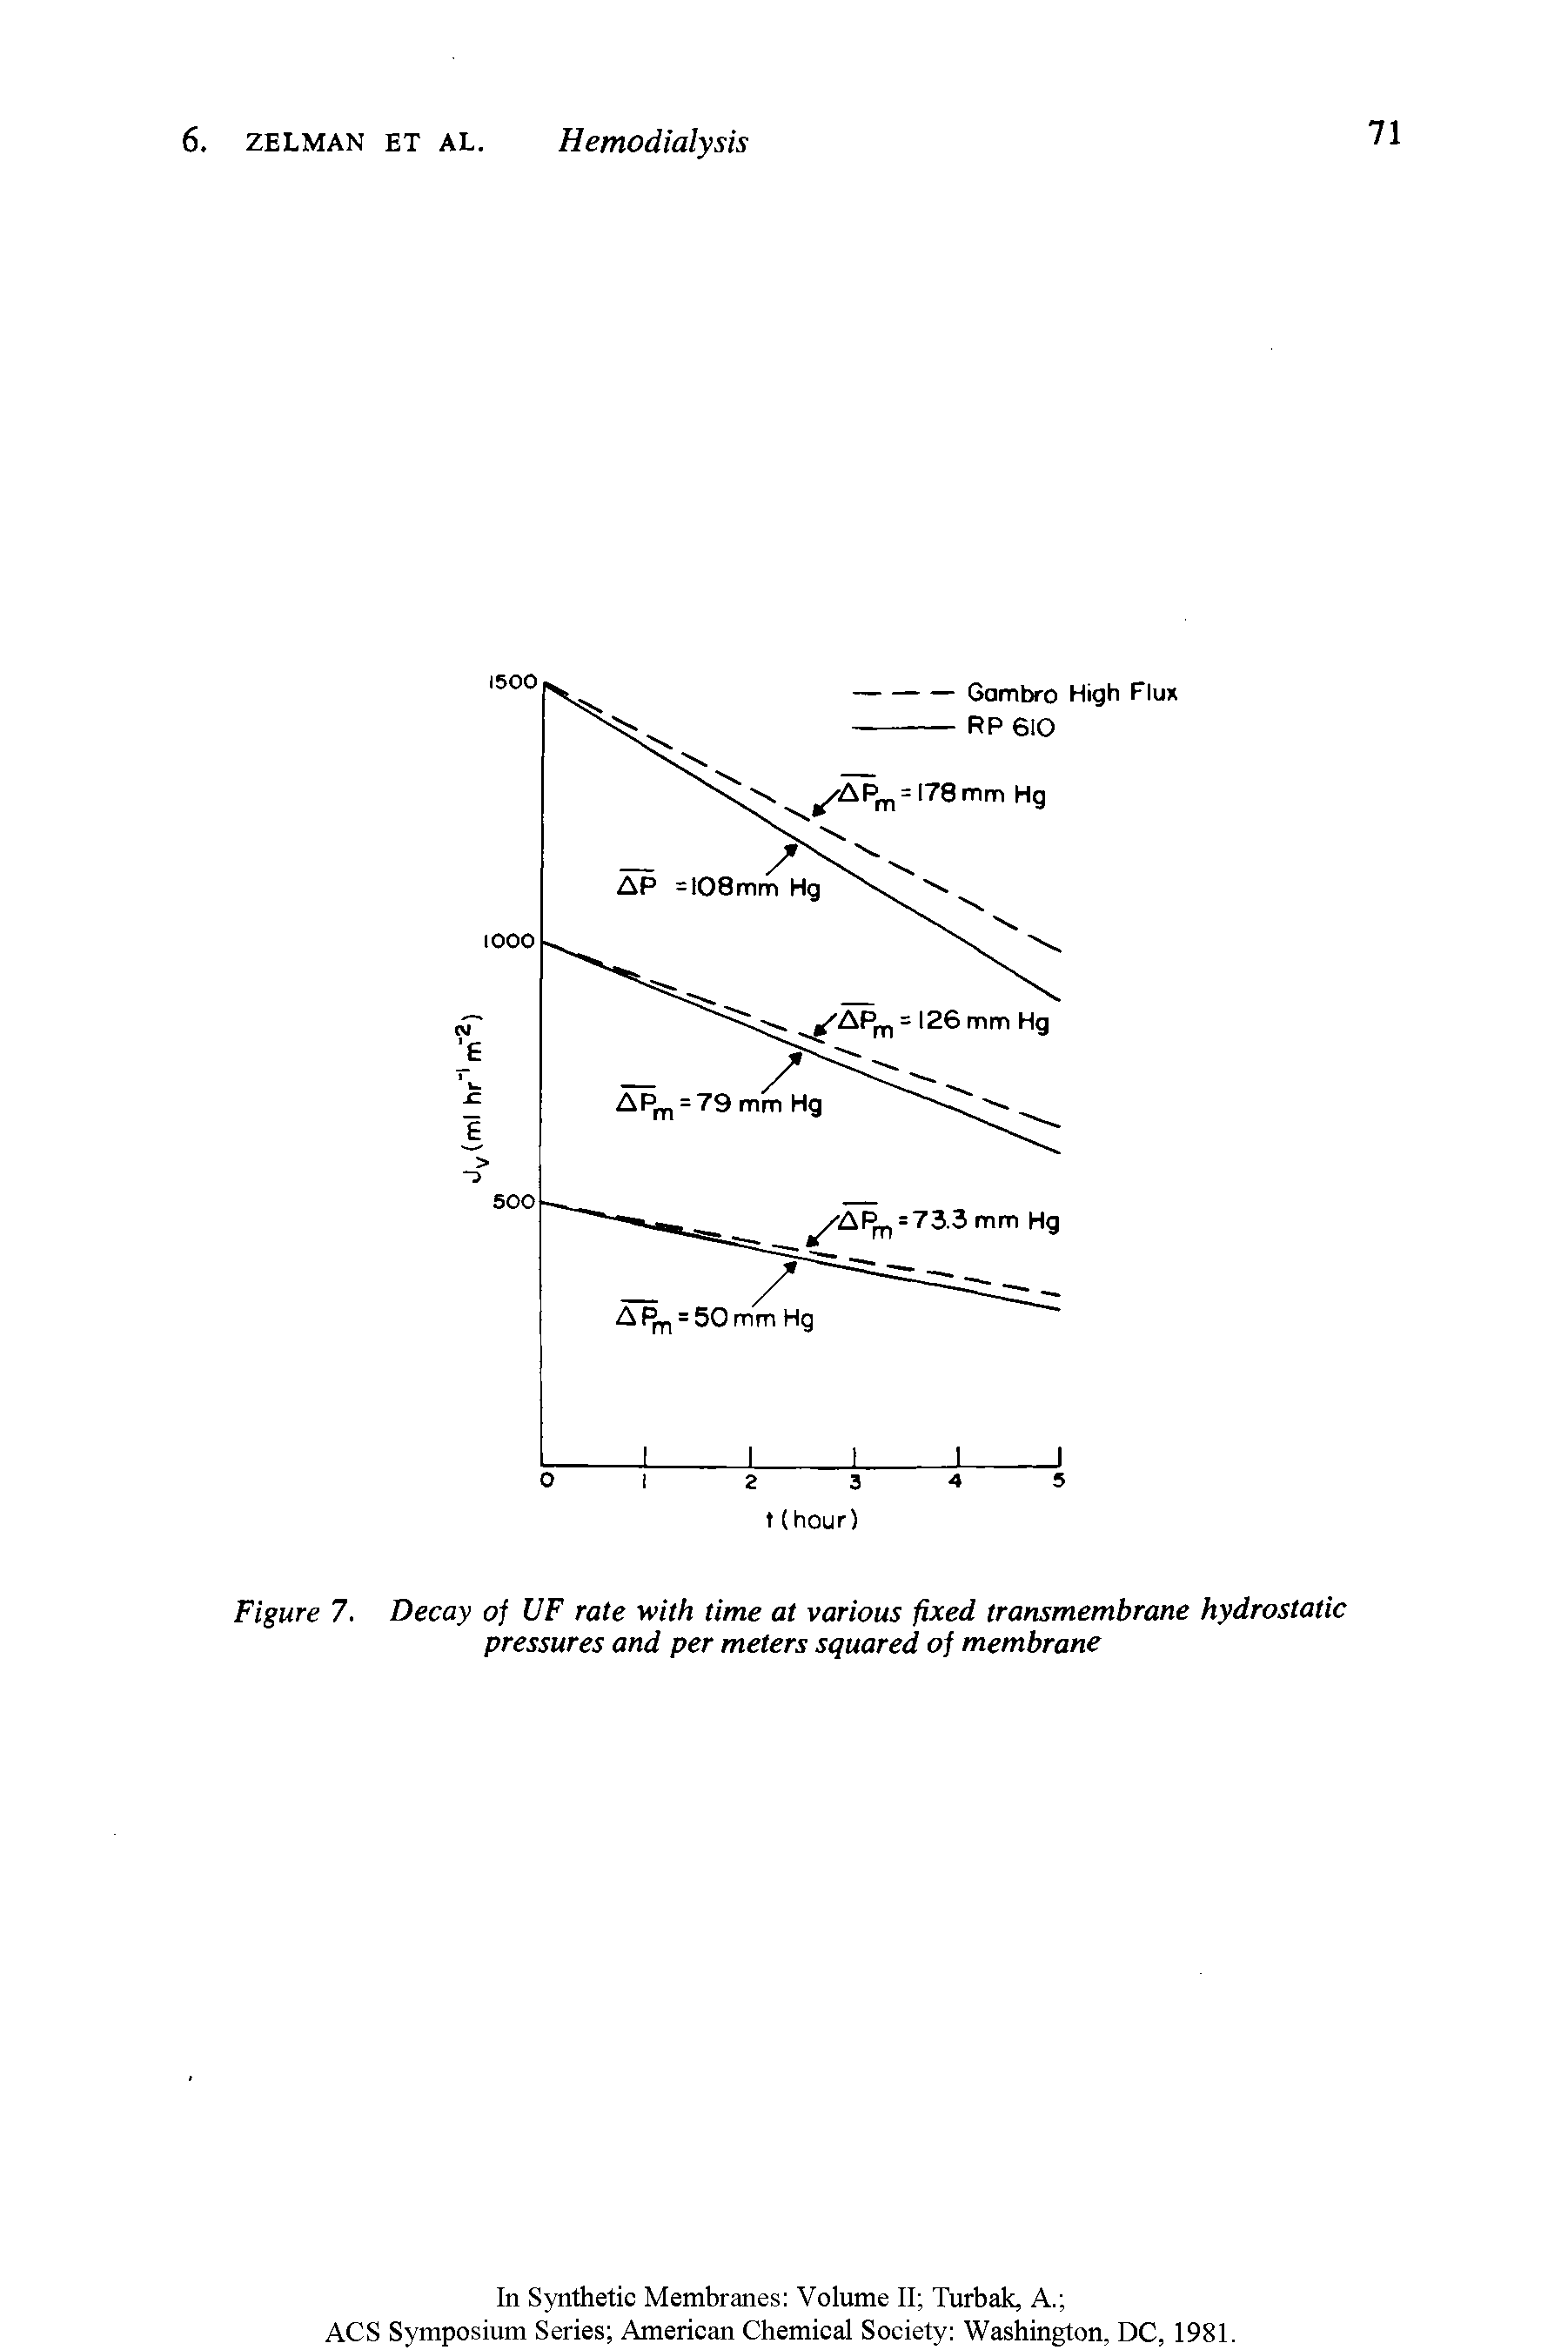 Figure 7. Decay of UF rate with time at various fixed transmembrane hydrostatic pressures and per meters squared of membrane...